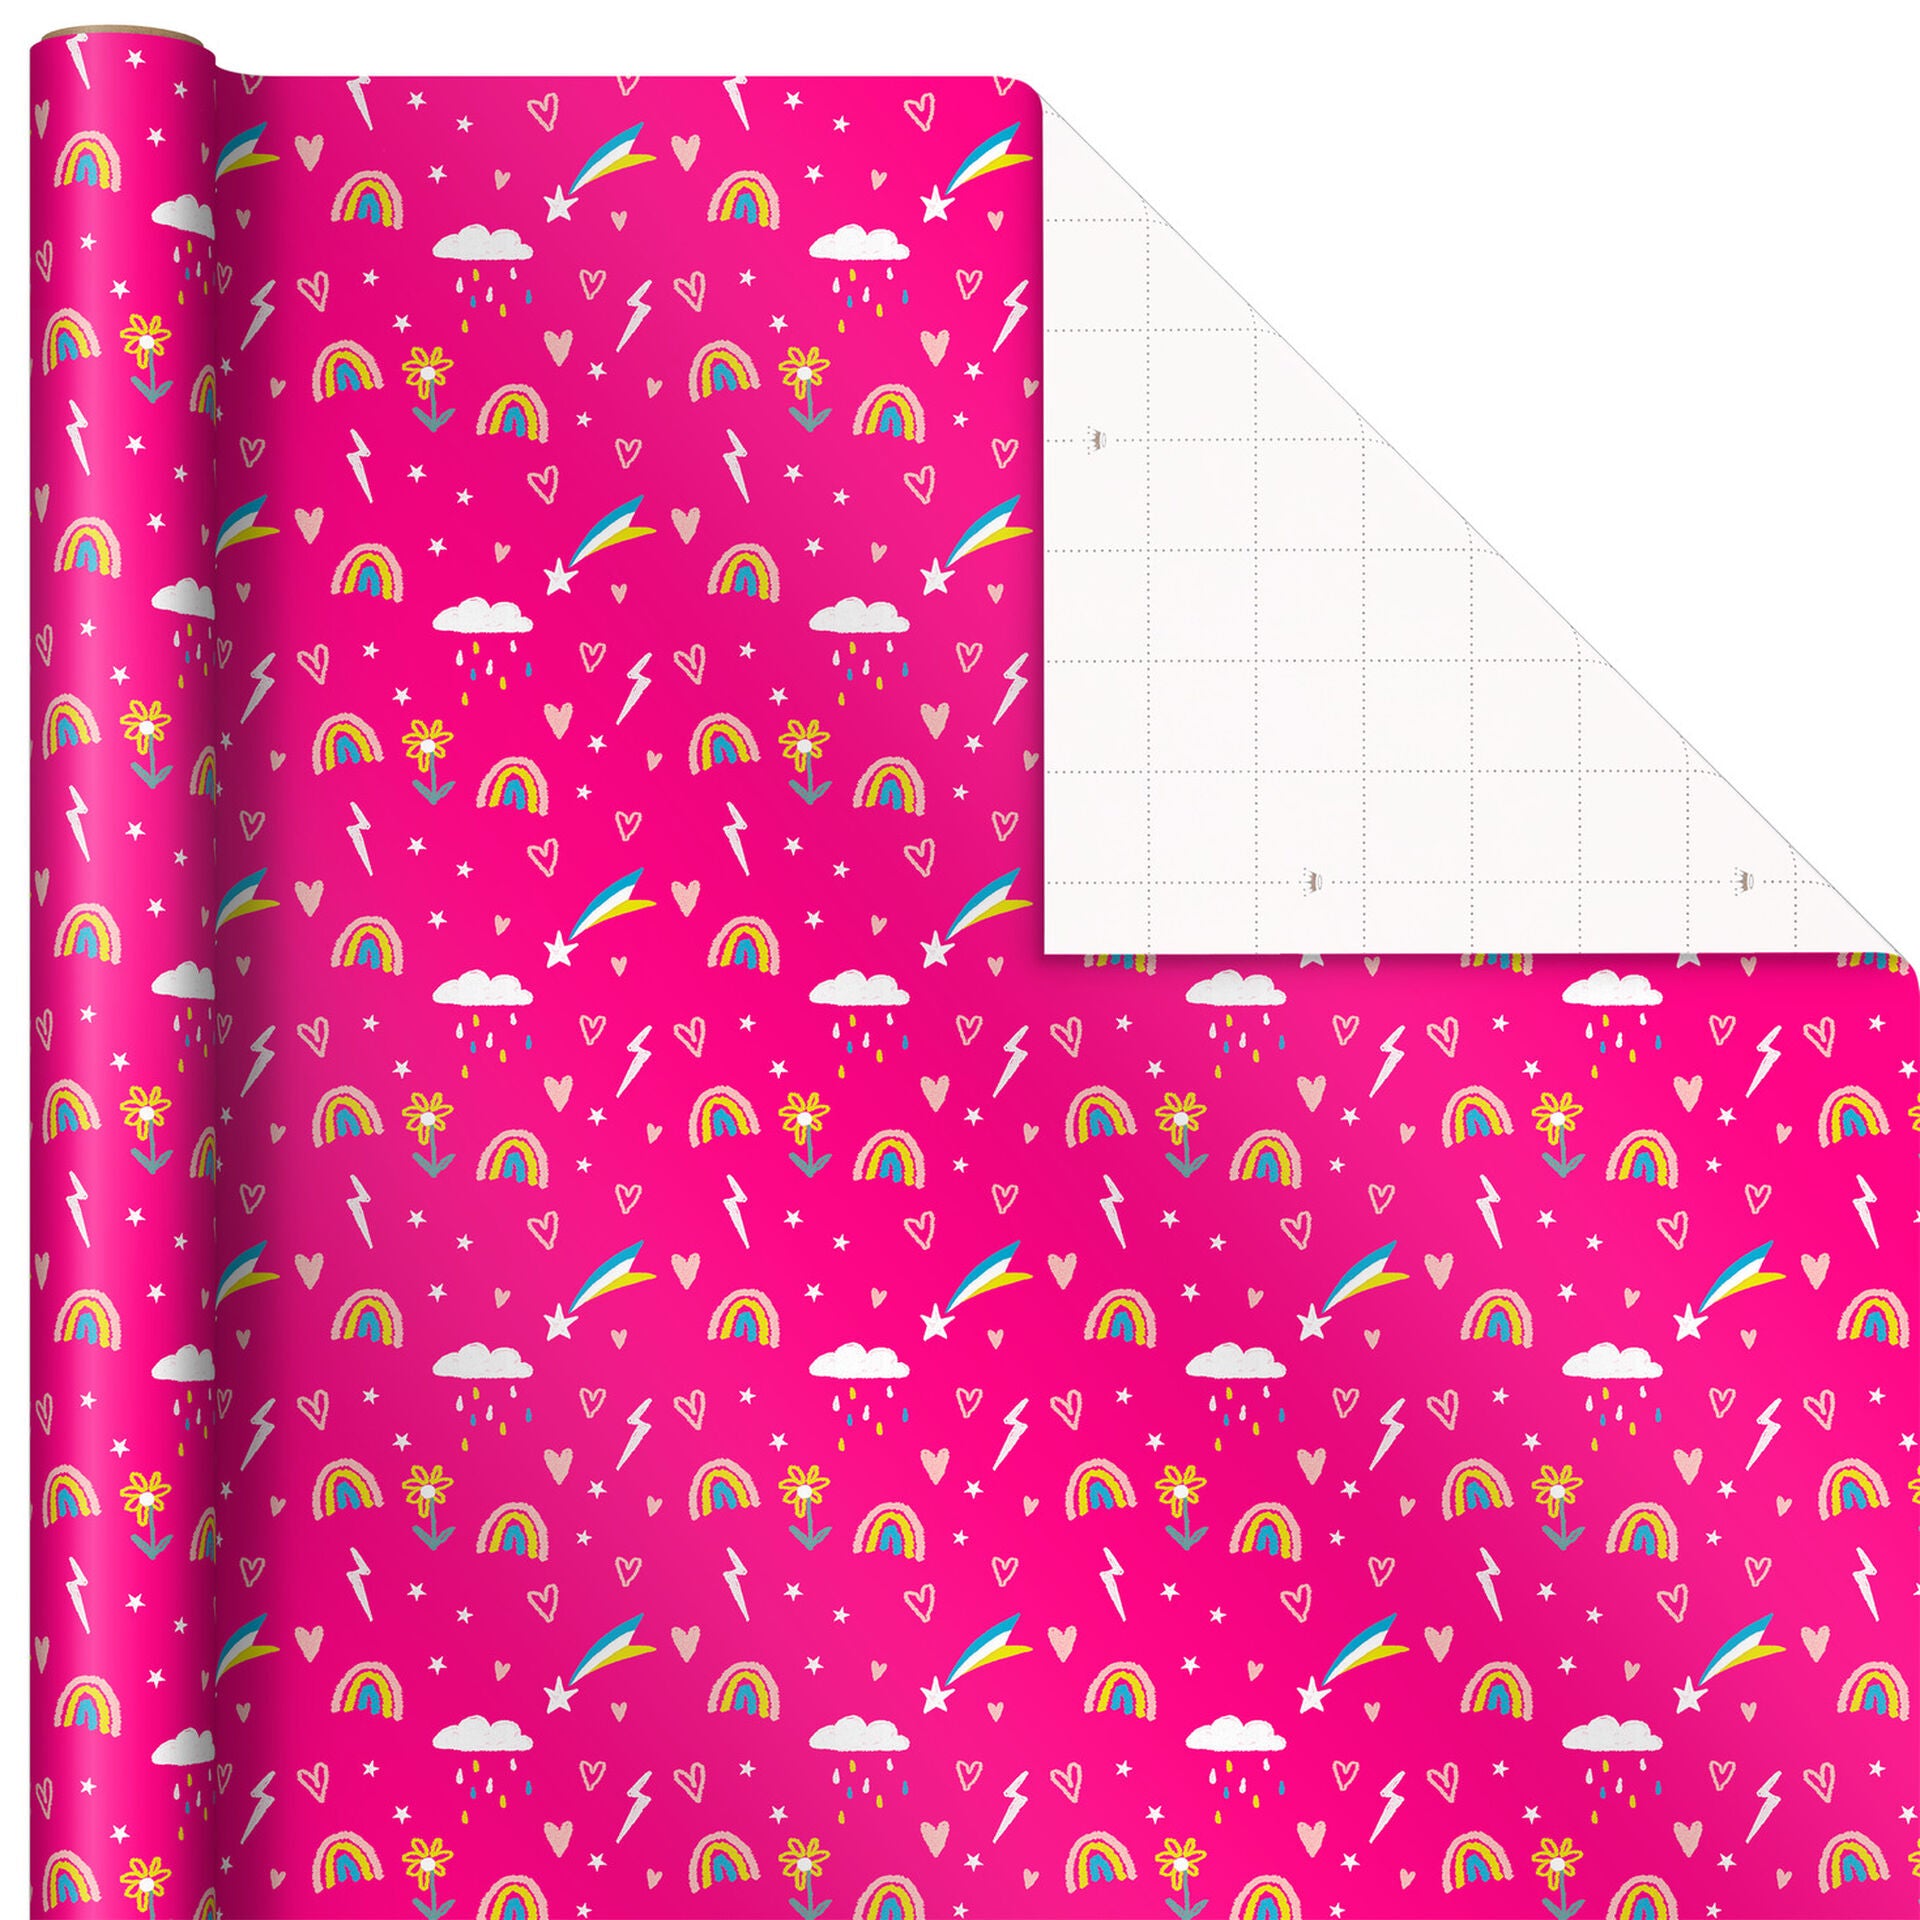 Hallmark EJR6343 Chalk Doodles on Hot Pink Wrapping Paper, 25 sq